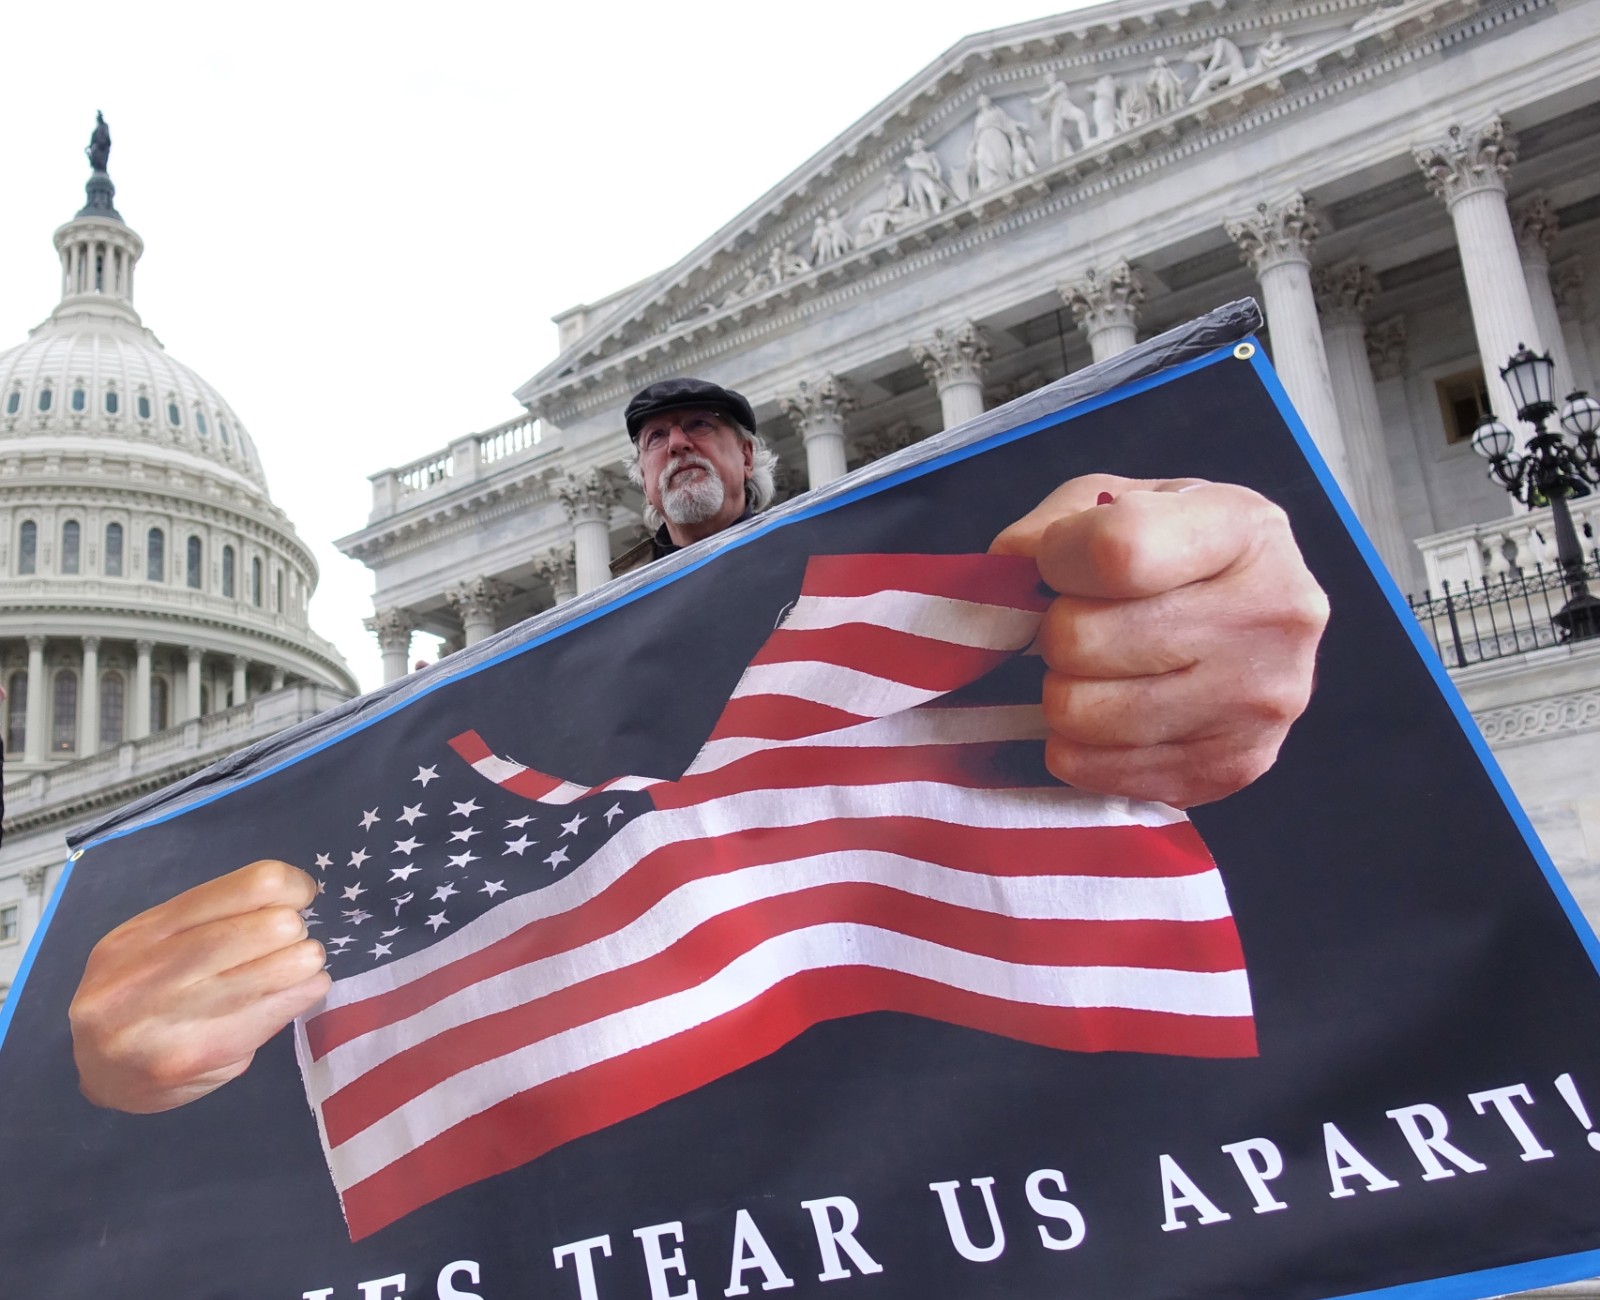 File photo shows A protester holding a poster stands in front of the Capitol in Washington D.C., the United States. /Xinhua